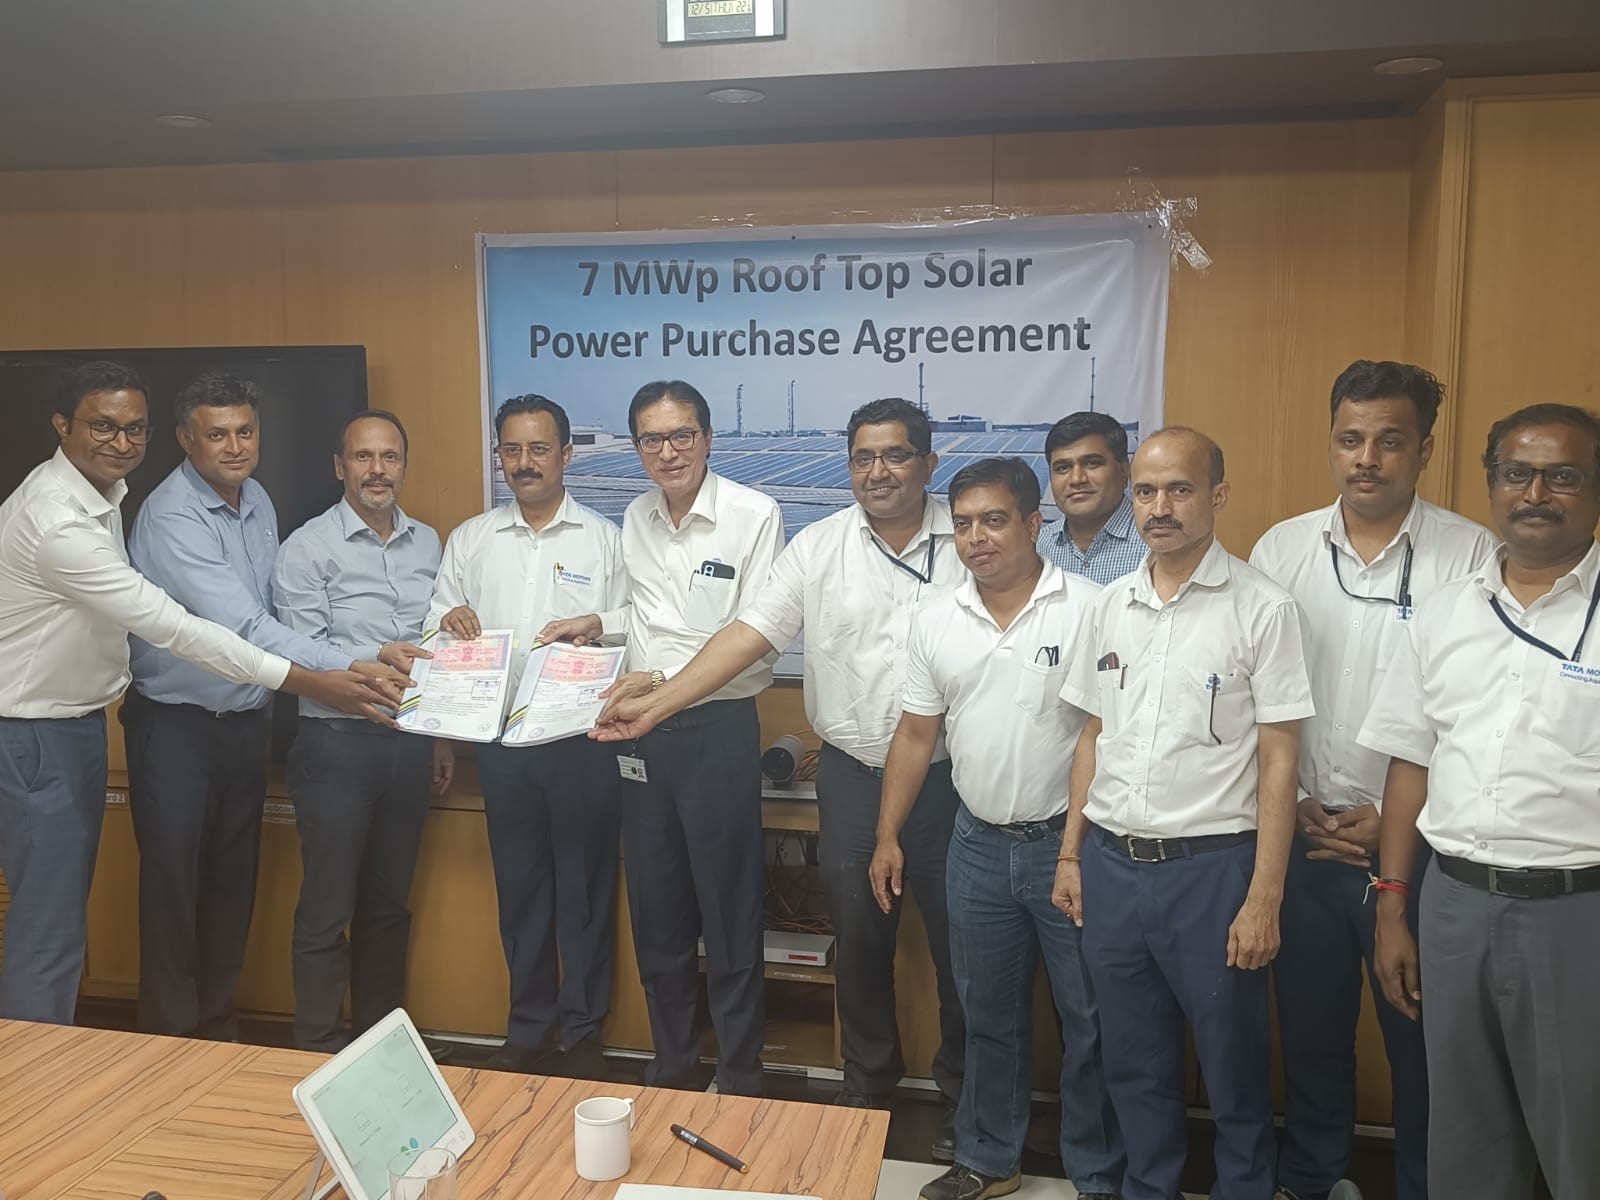 Tata Motors and Tata Power Join Hands to Install 7 MWp Solar Rooftop Expansion Project in Pune decoding=